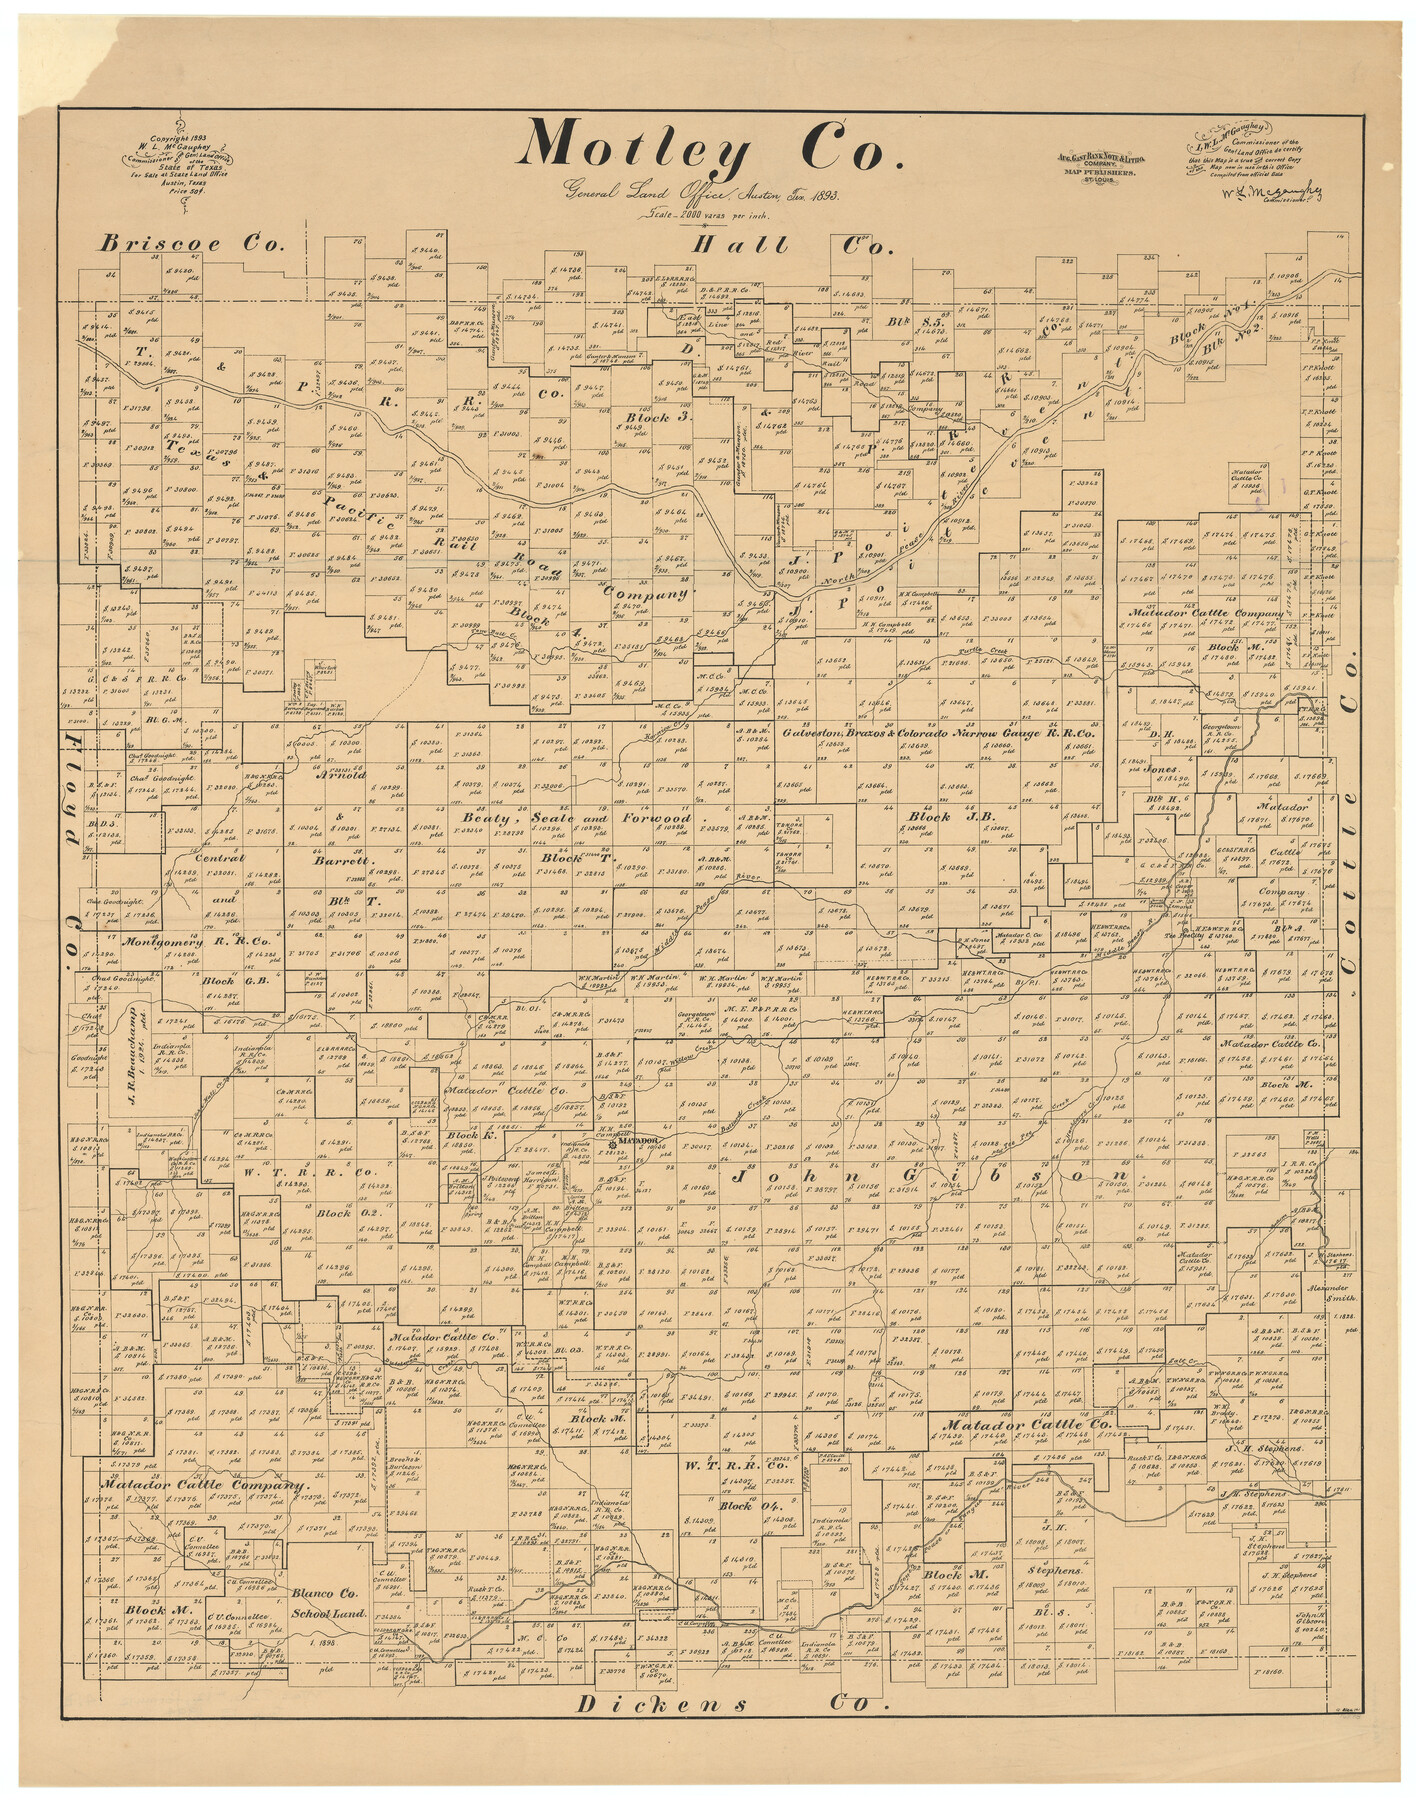 10798, Motley Co., General Map Collection